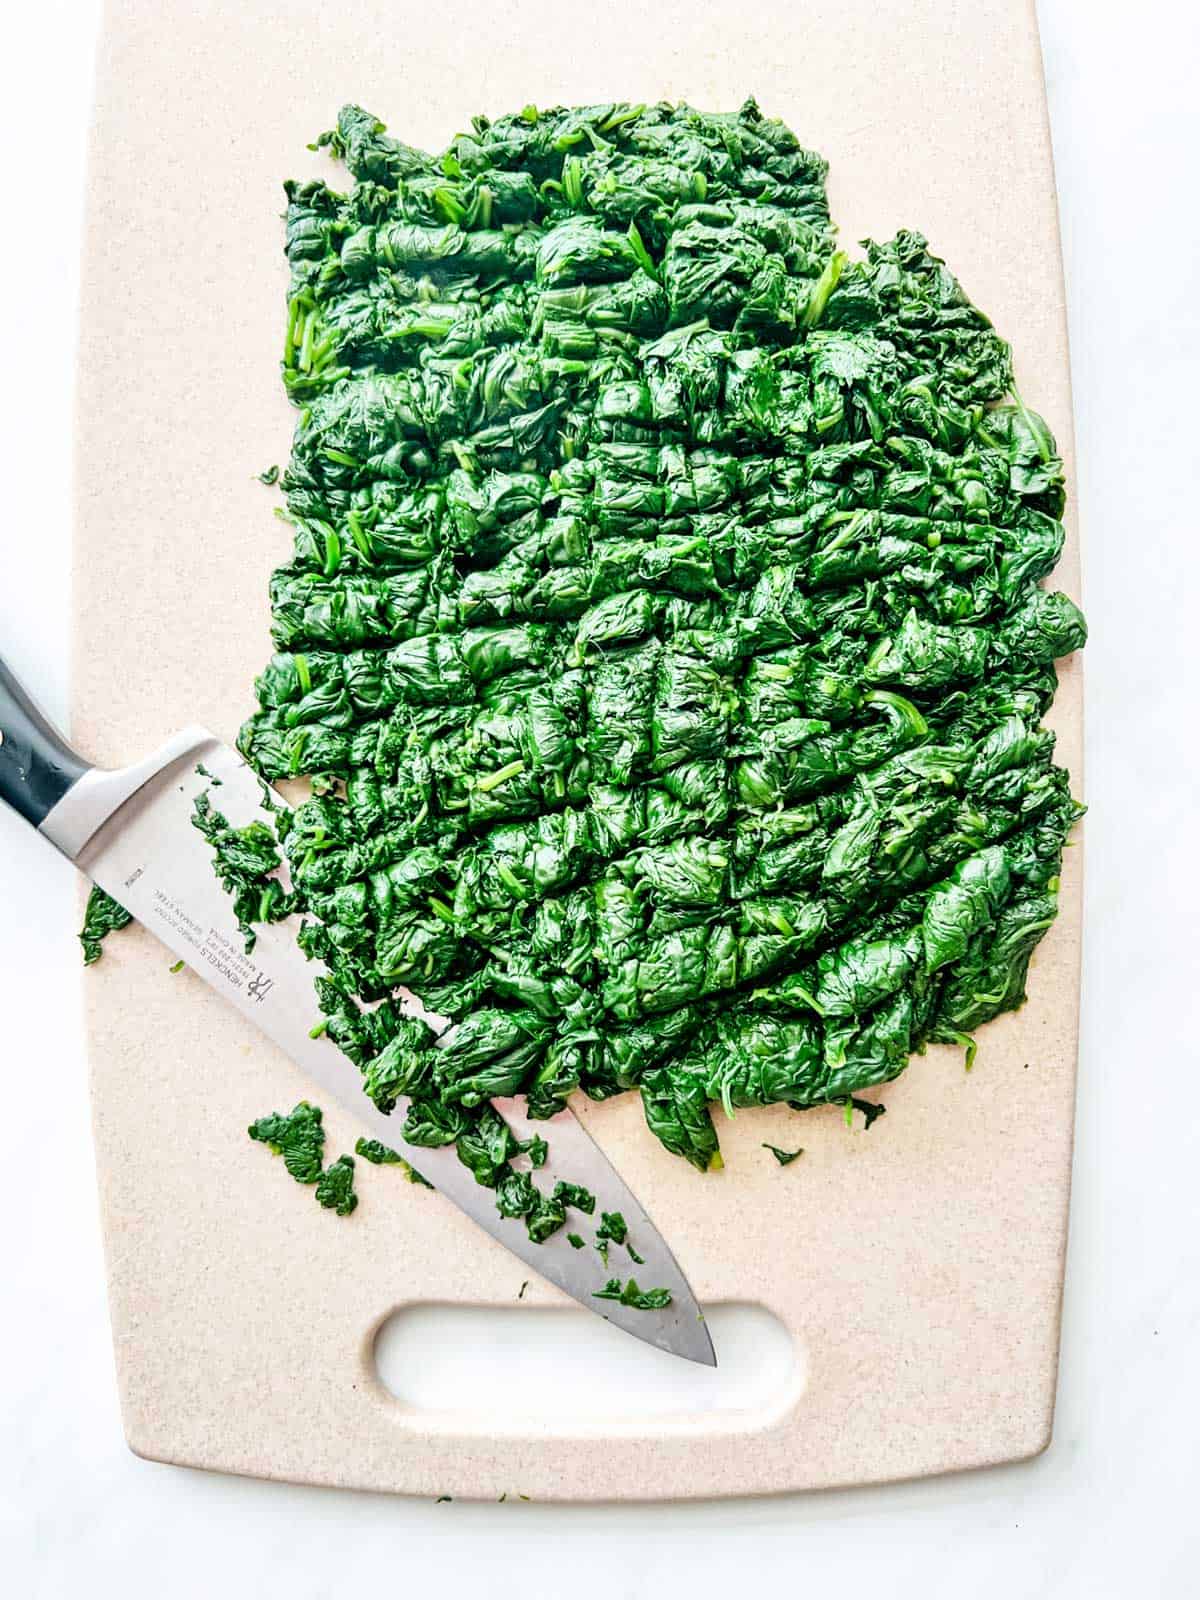 Cooked spinach being chopped on a cutting board.